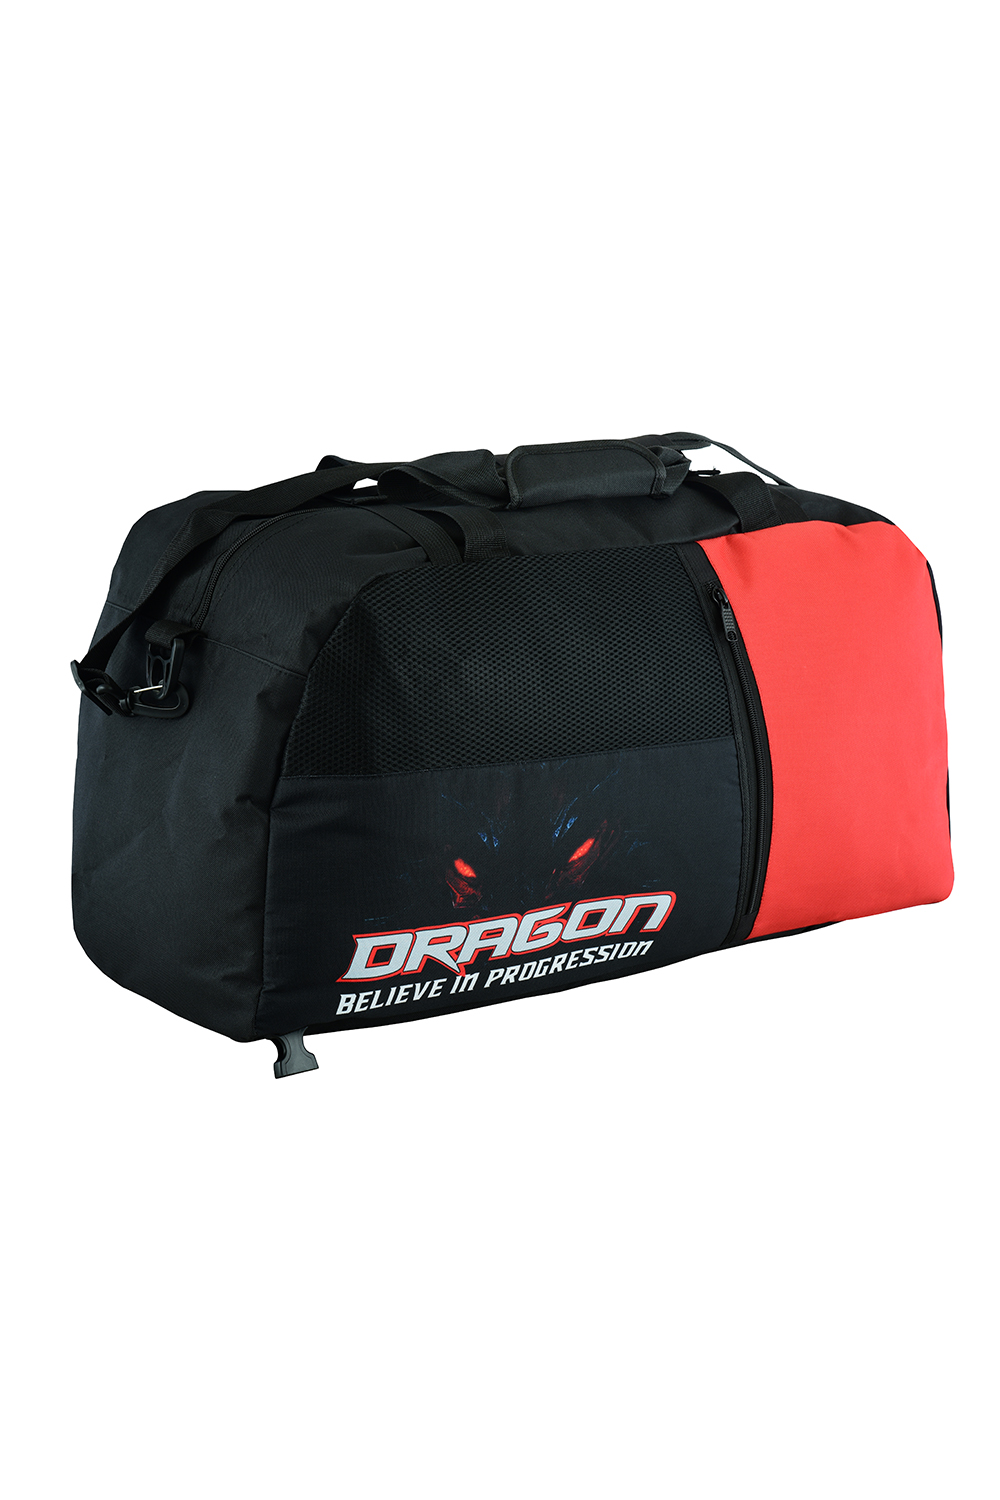 dragon waterproof bag packs shoulders casual sports carry outdoor home gym